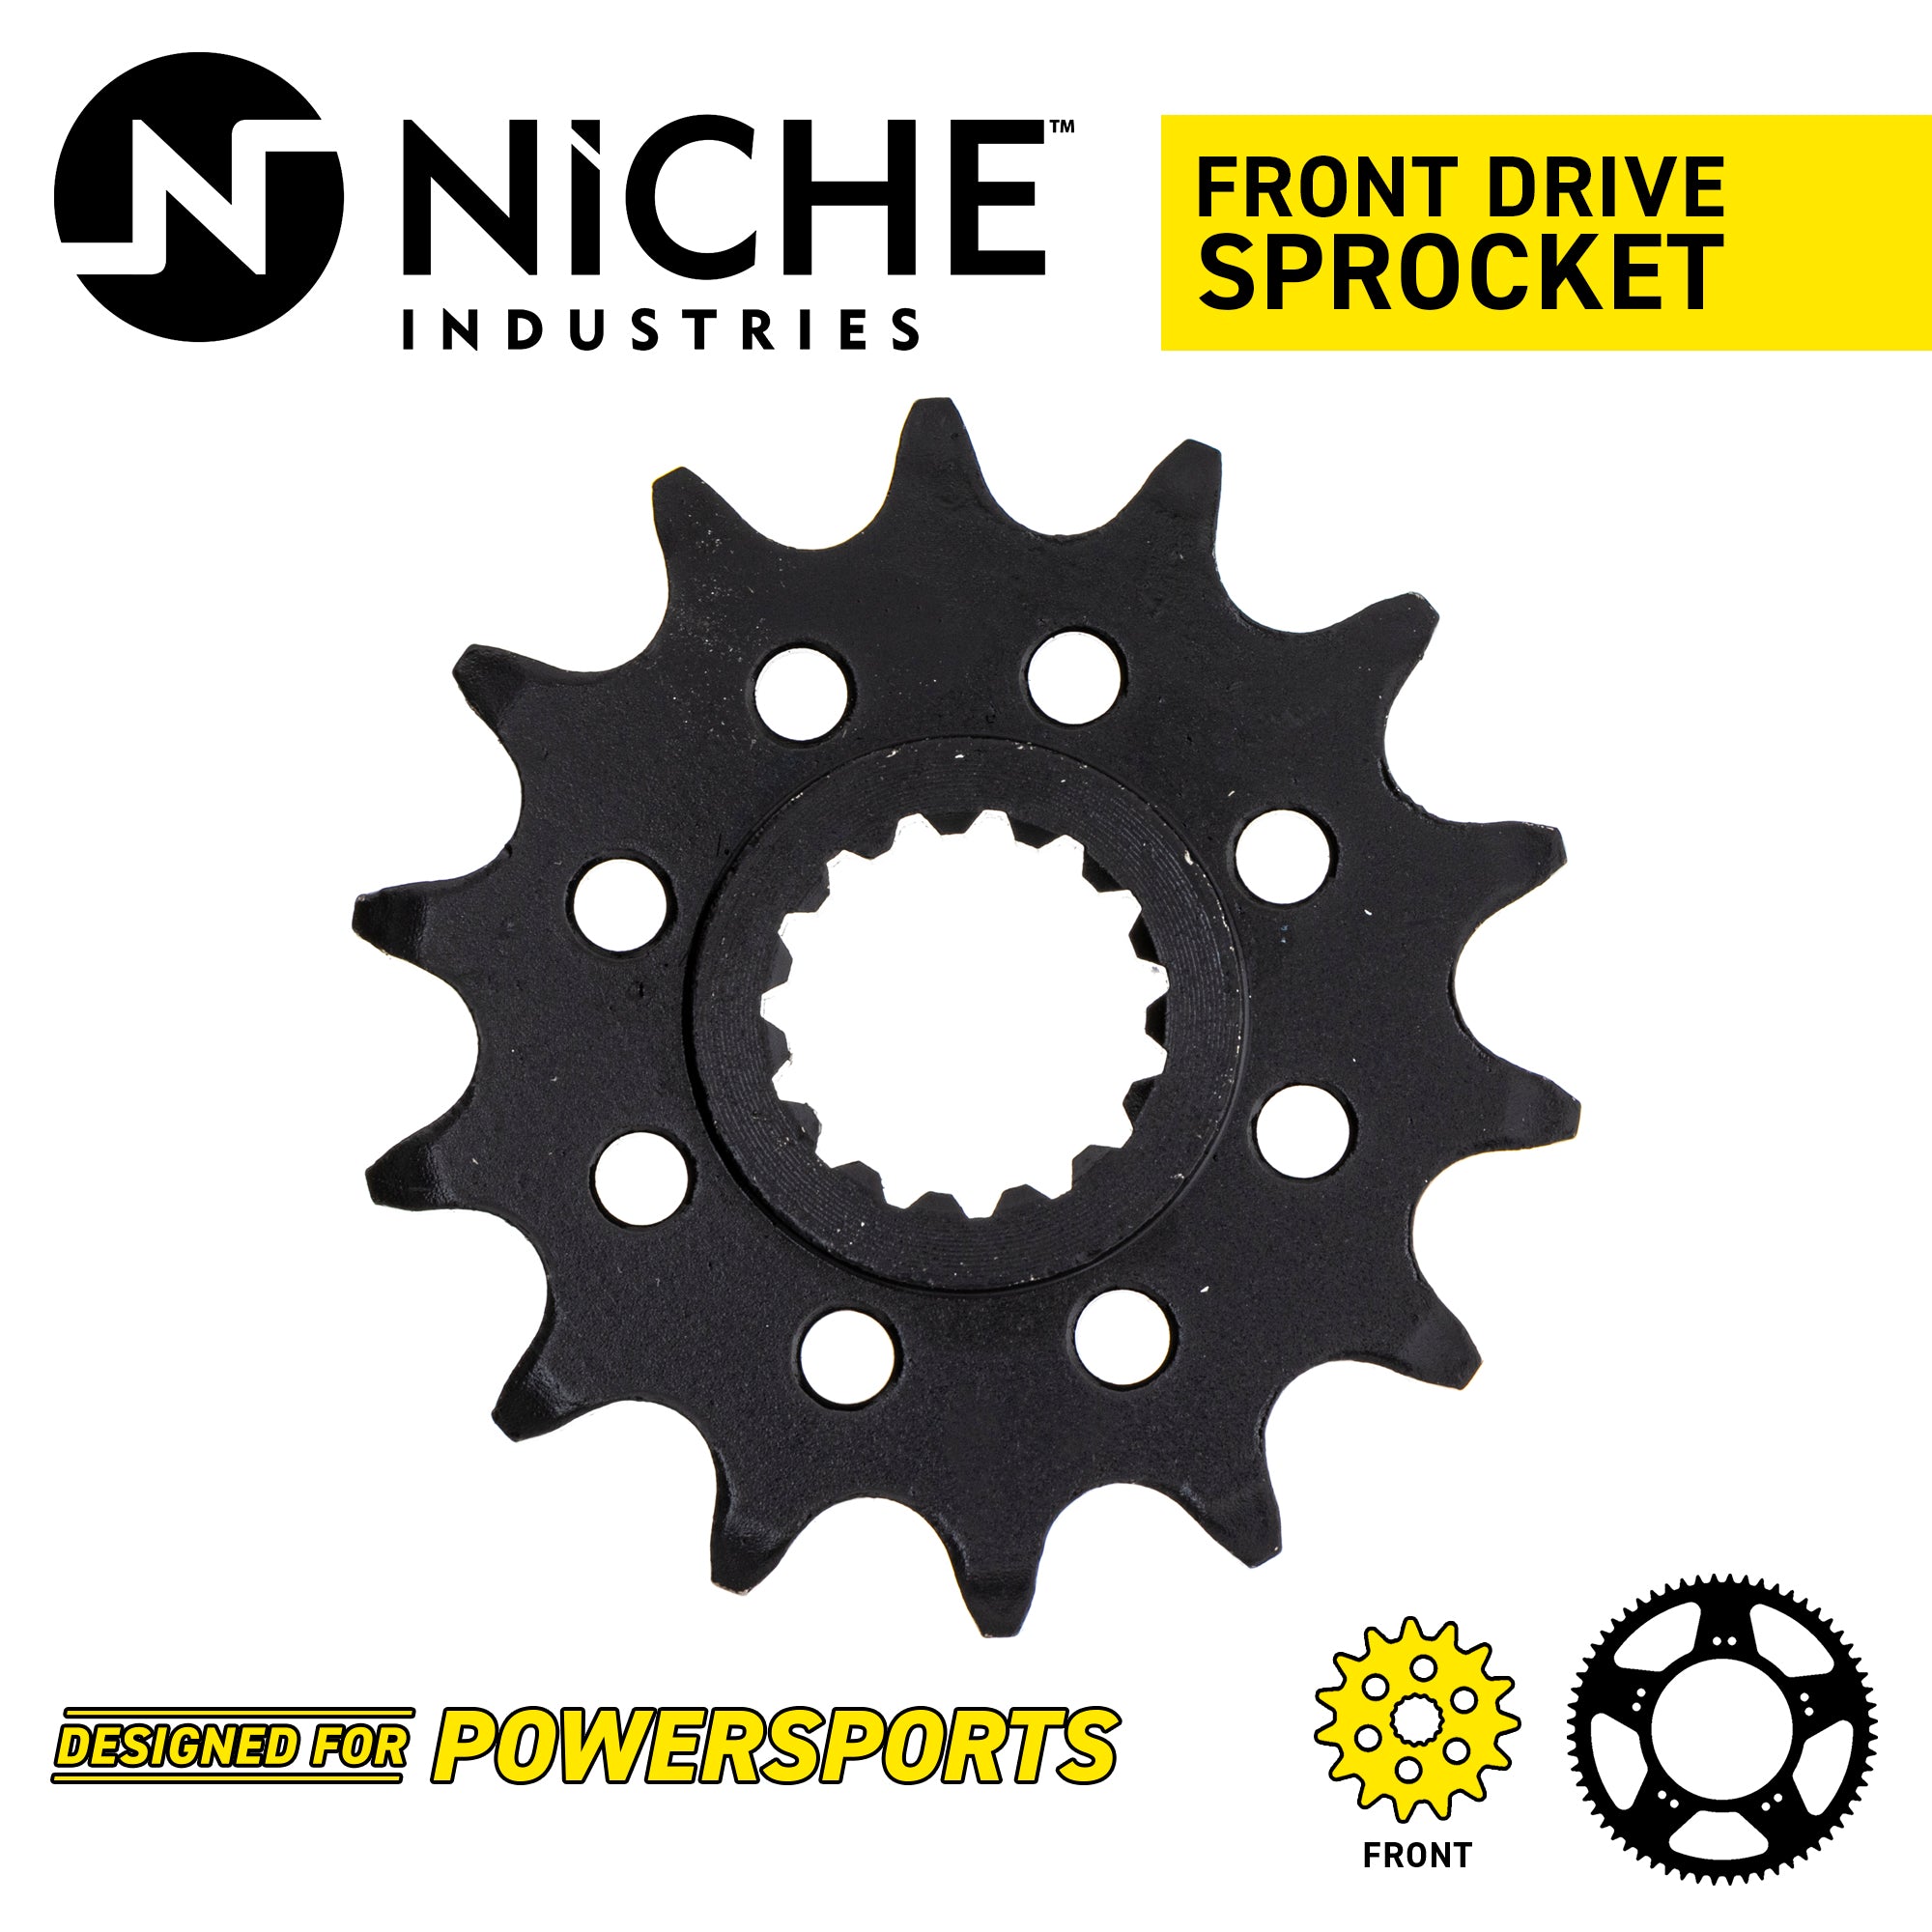 Drive Sprockets & Chain Kit For BETA MK1004652